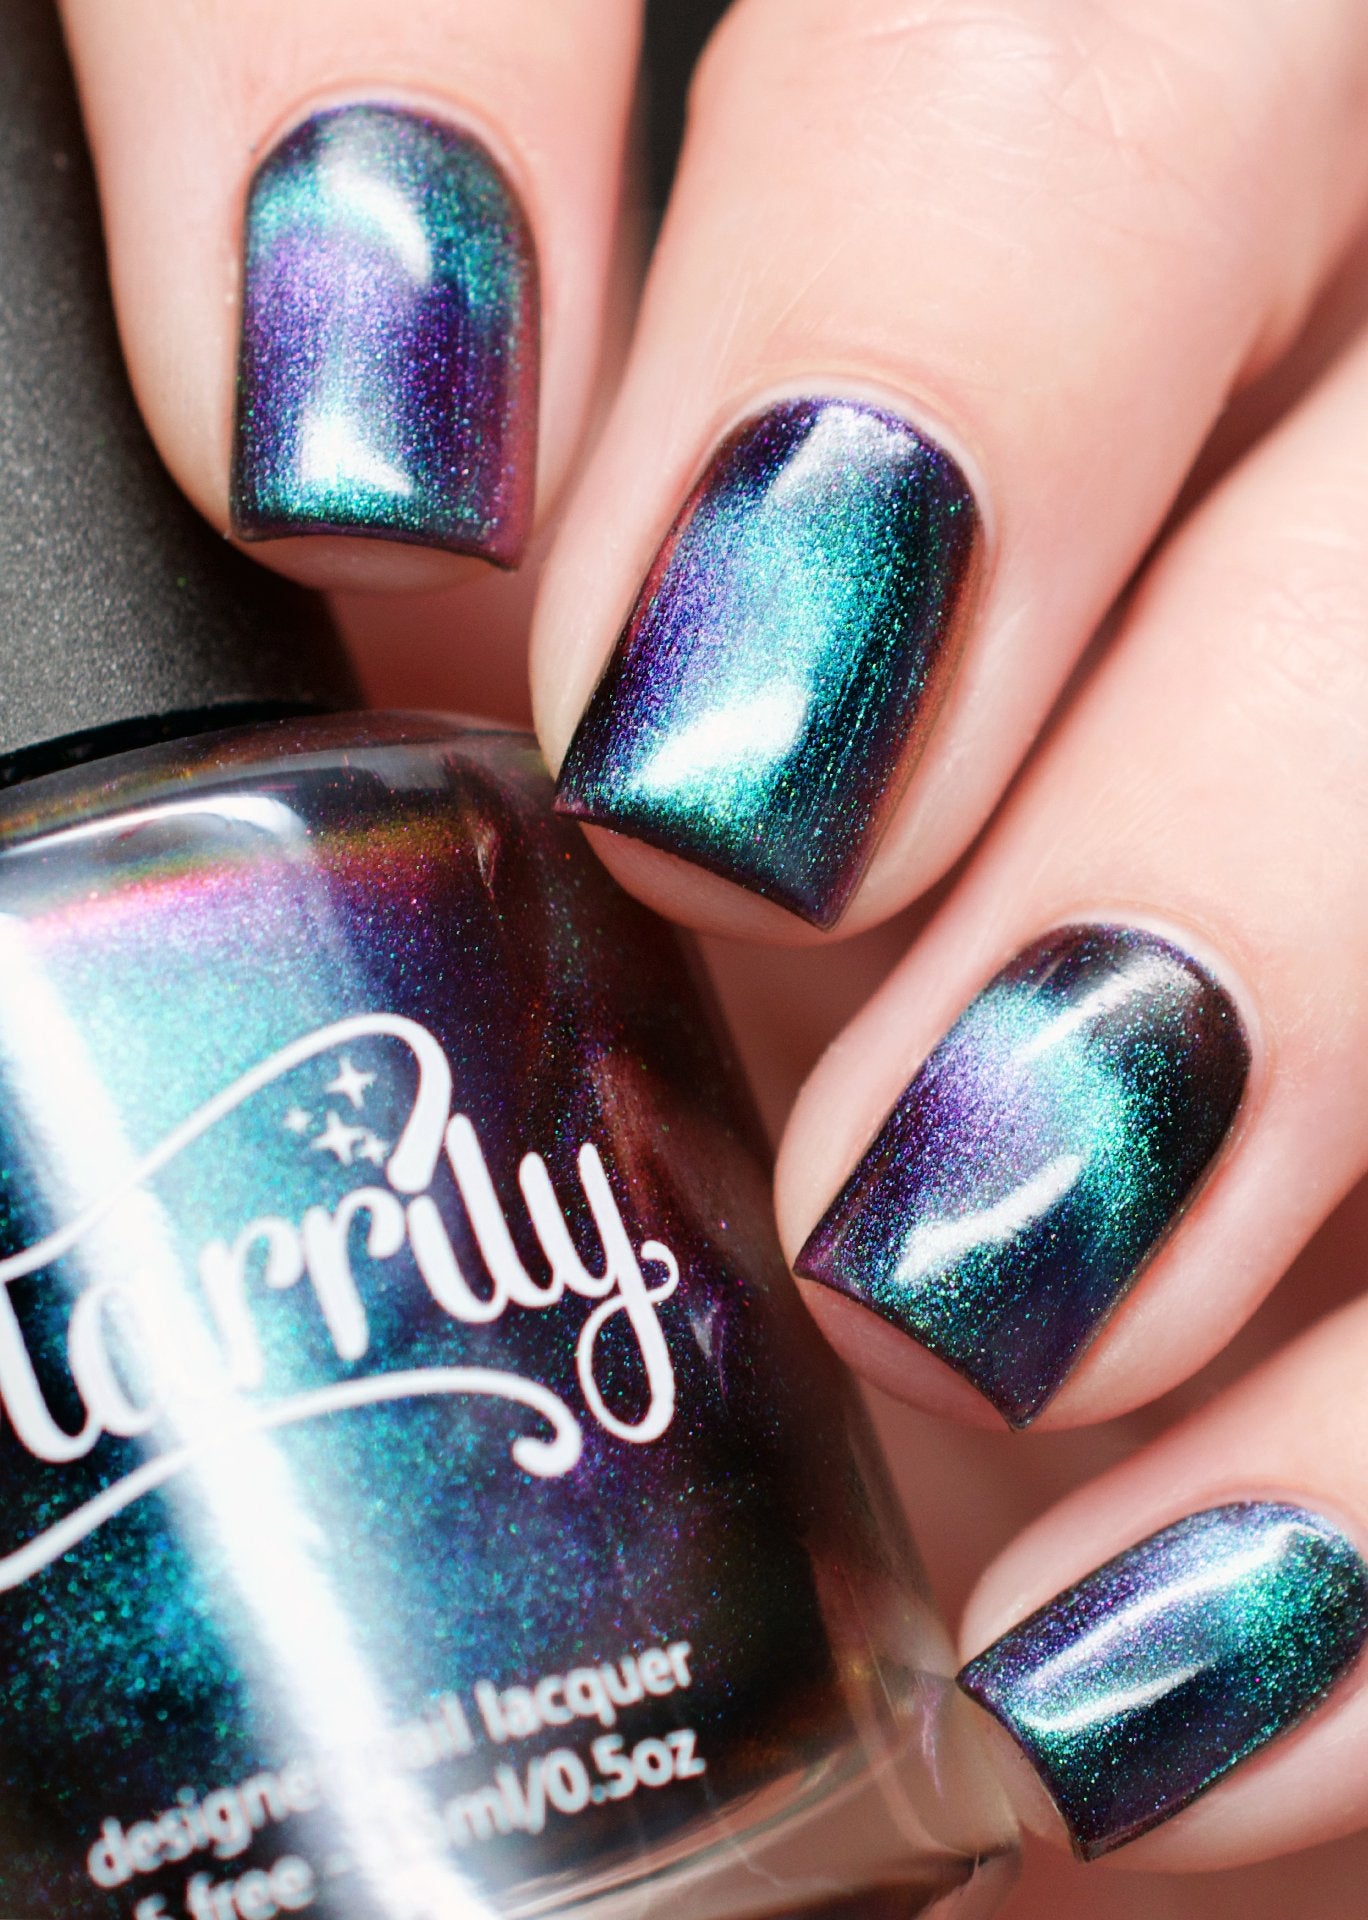 Andromeda - Multichrome magnetic nail polish by Starrily Purple Green Color Shift